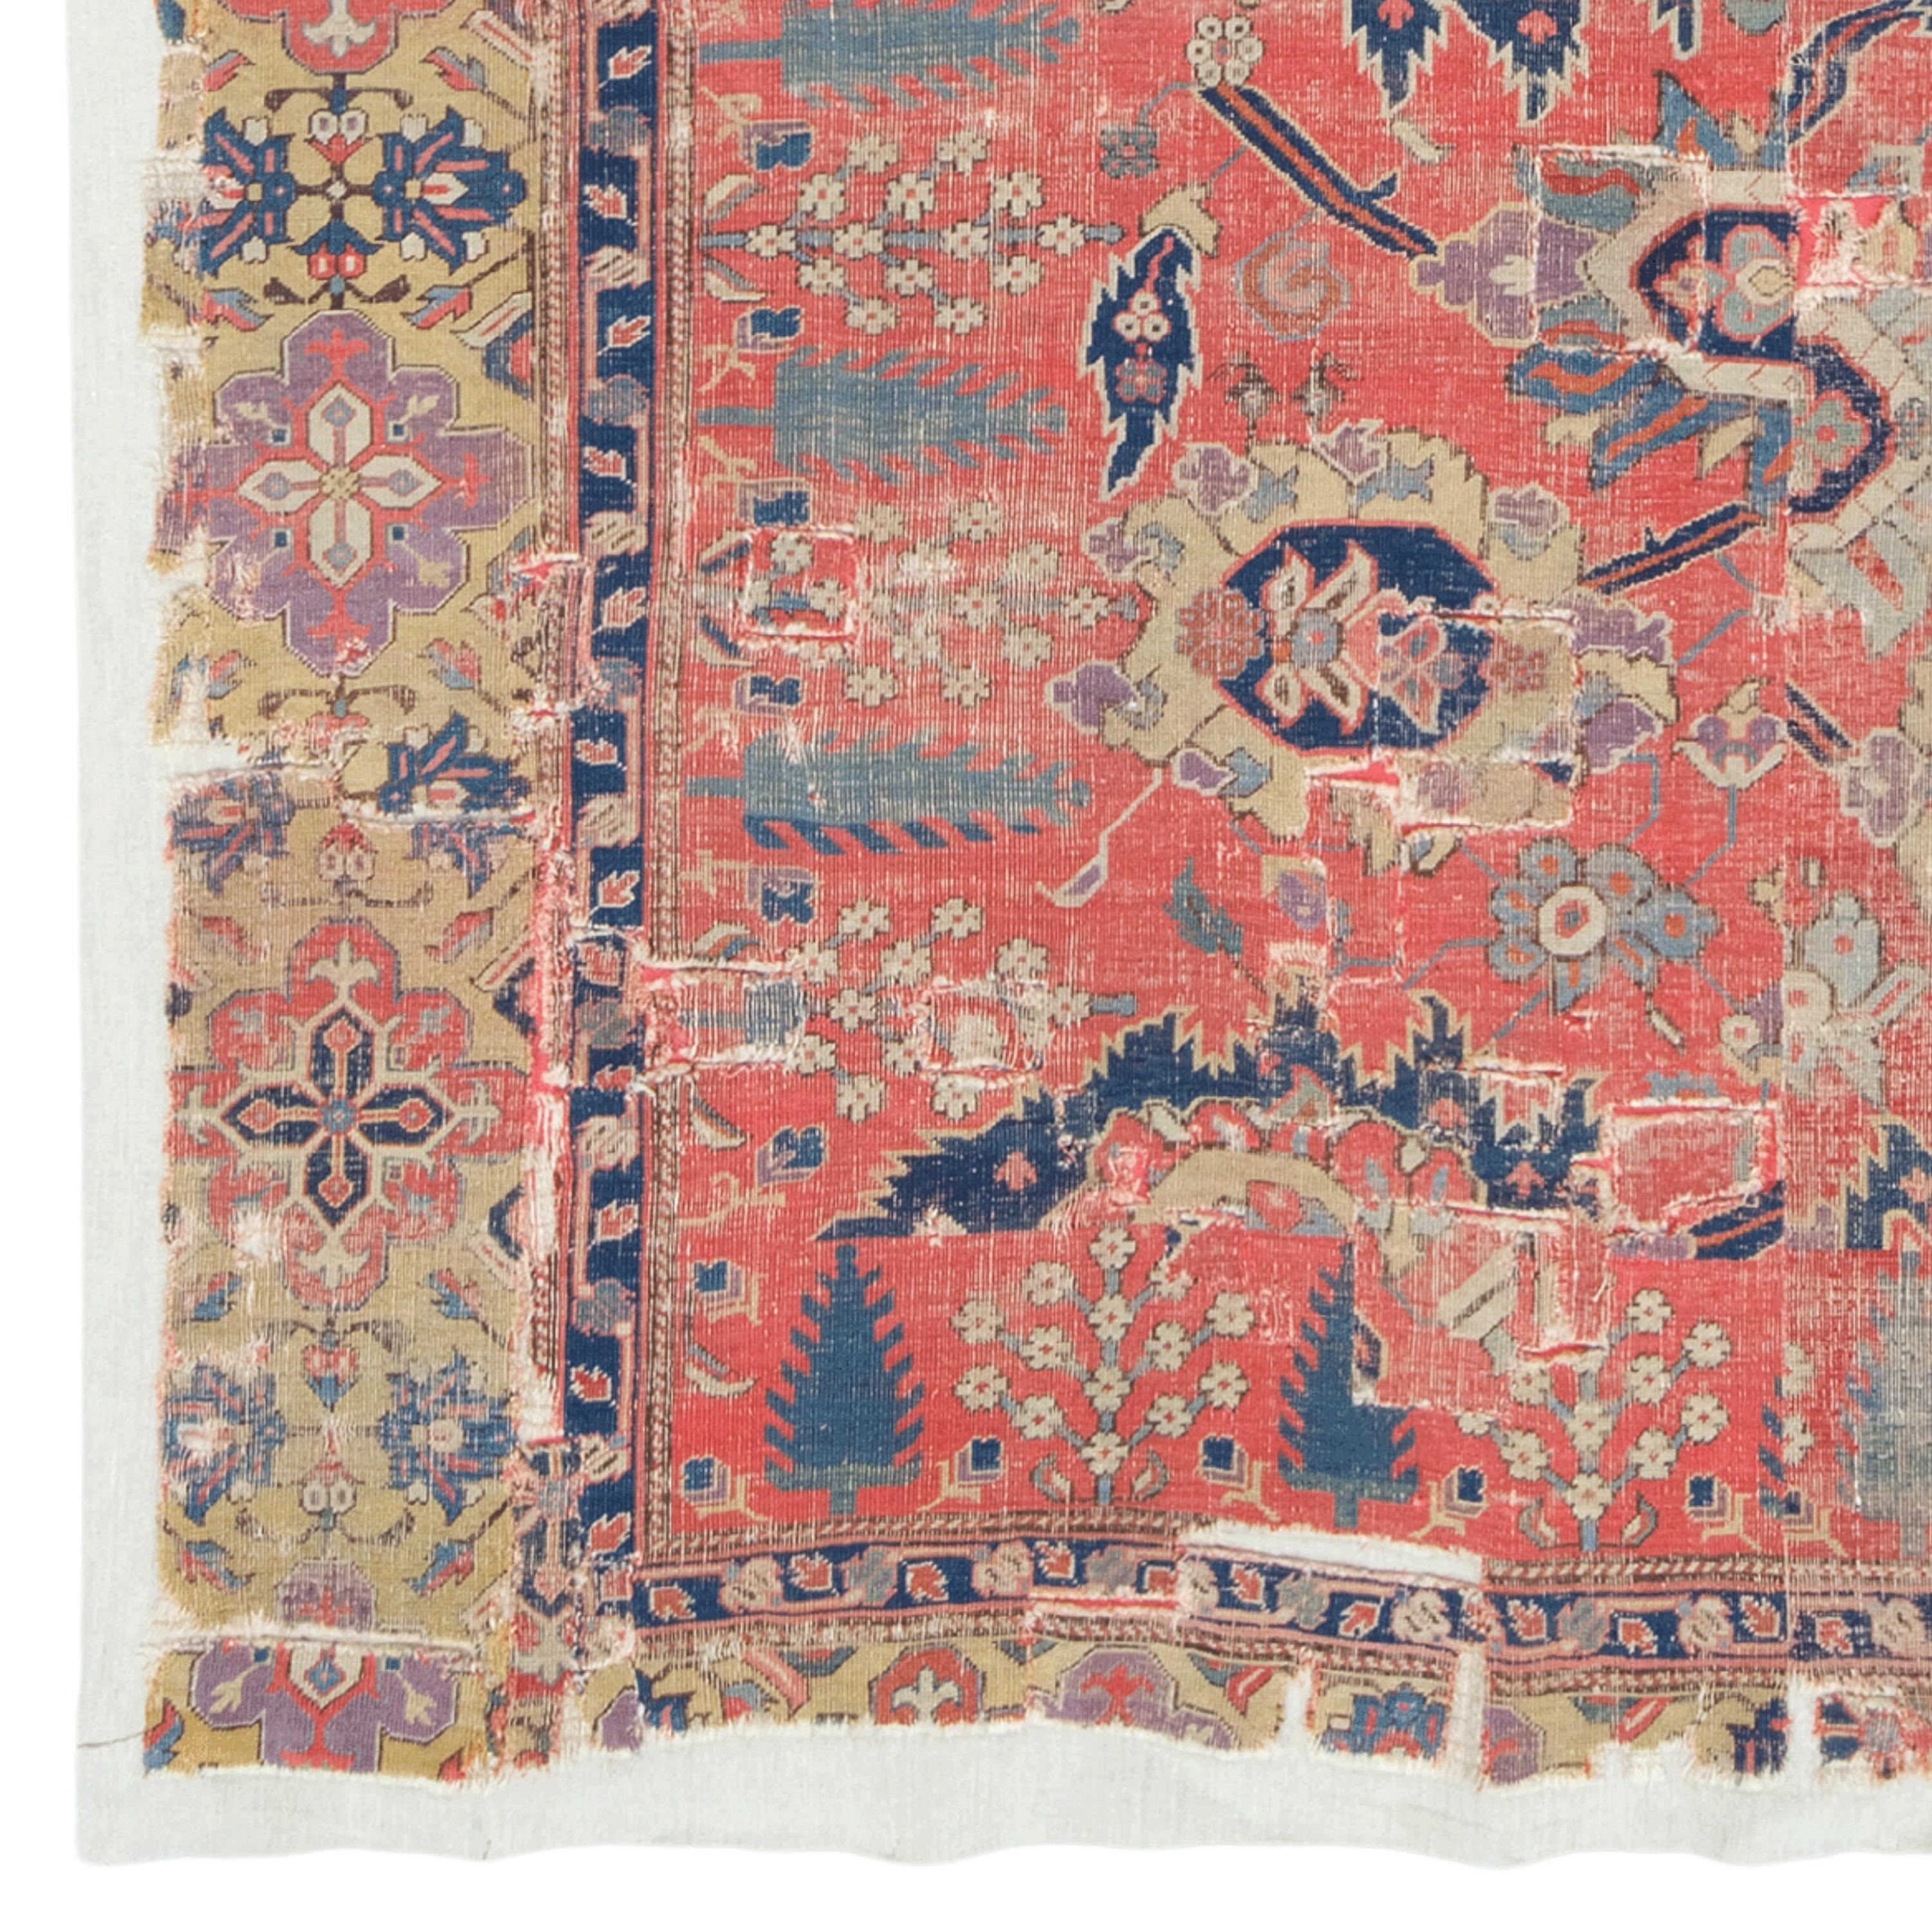 Antique Caucasian Fragment - 18th Century Kazak Fragment

The Magnificence of the Historical Texture This antique Kazakh carpet piece is a work of art from the 18th century. The color palette is dominated by rich red, blue and neutral tones and is